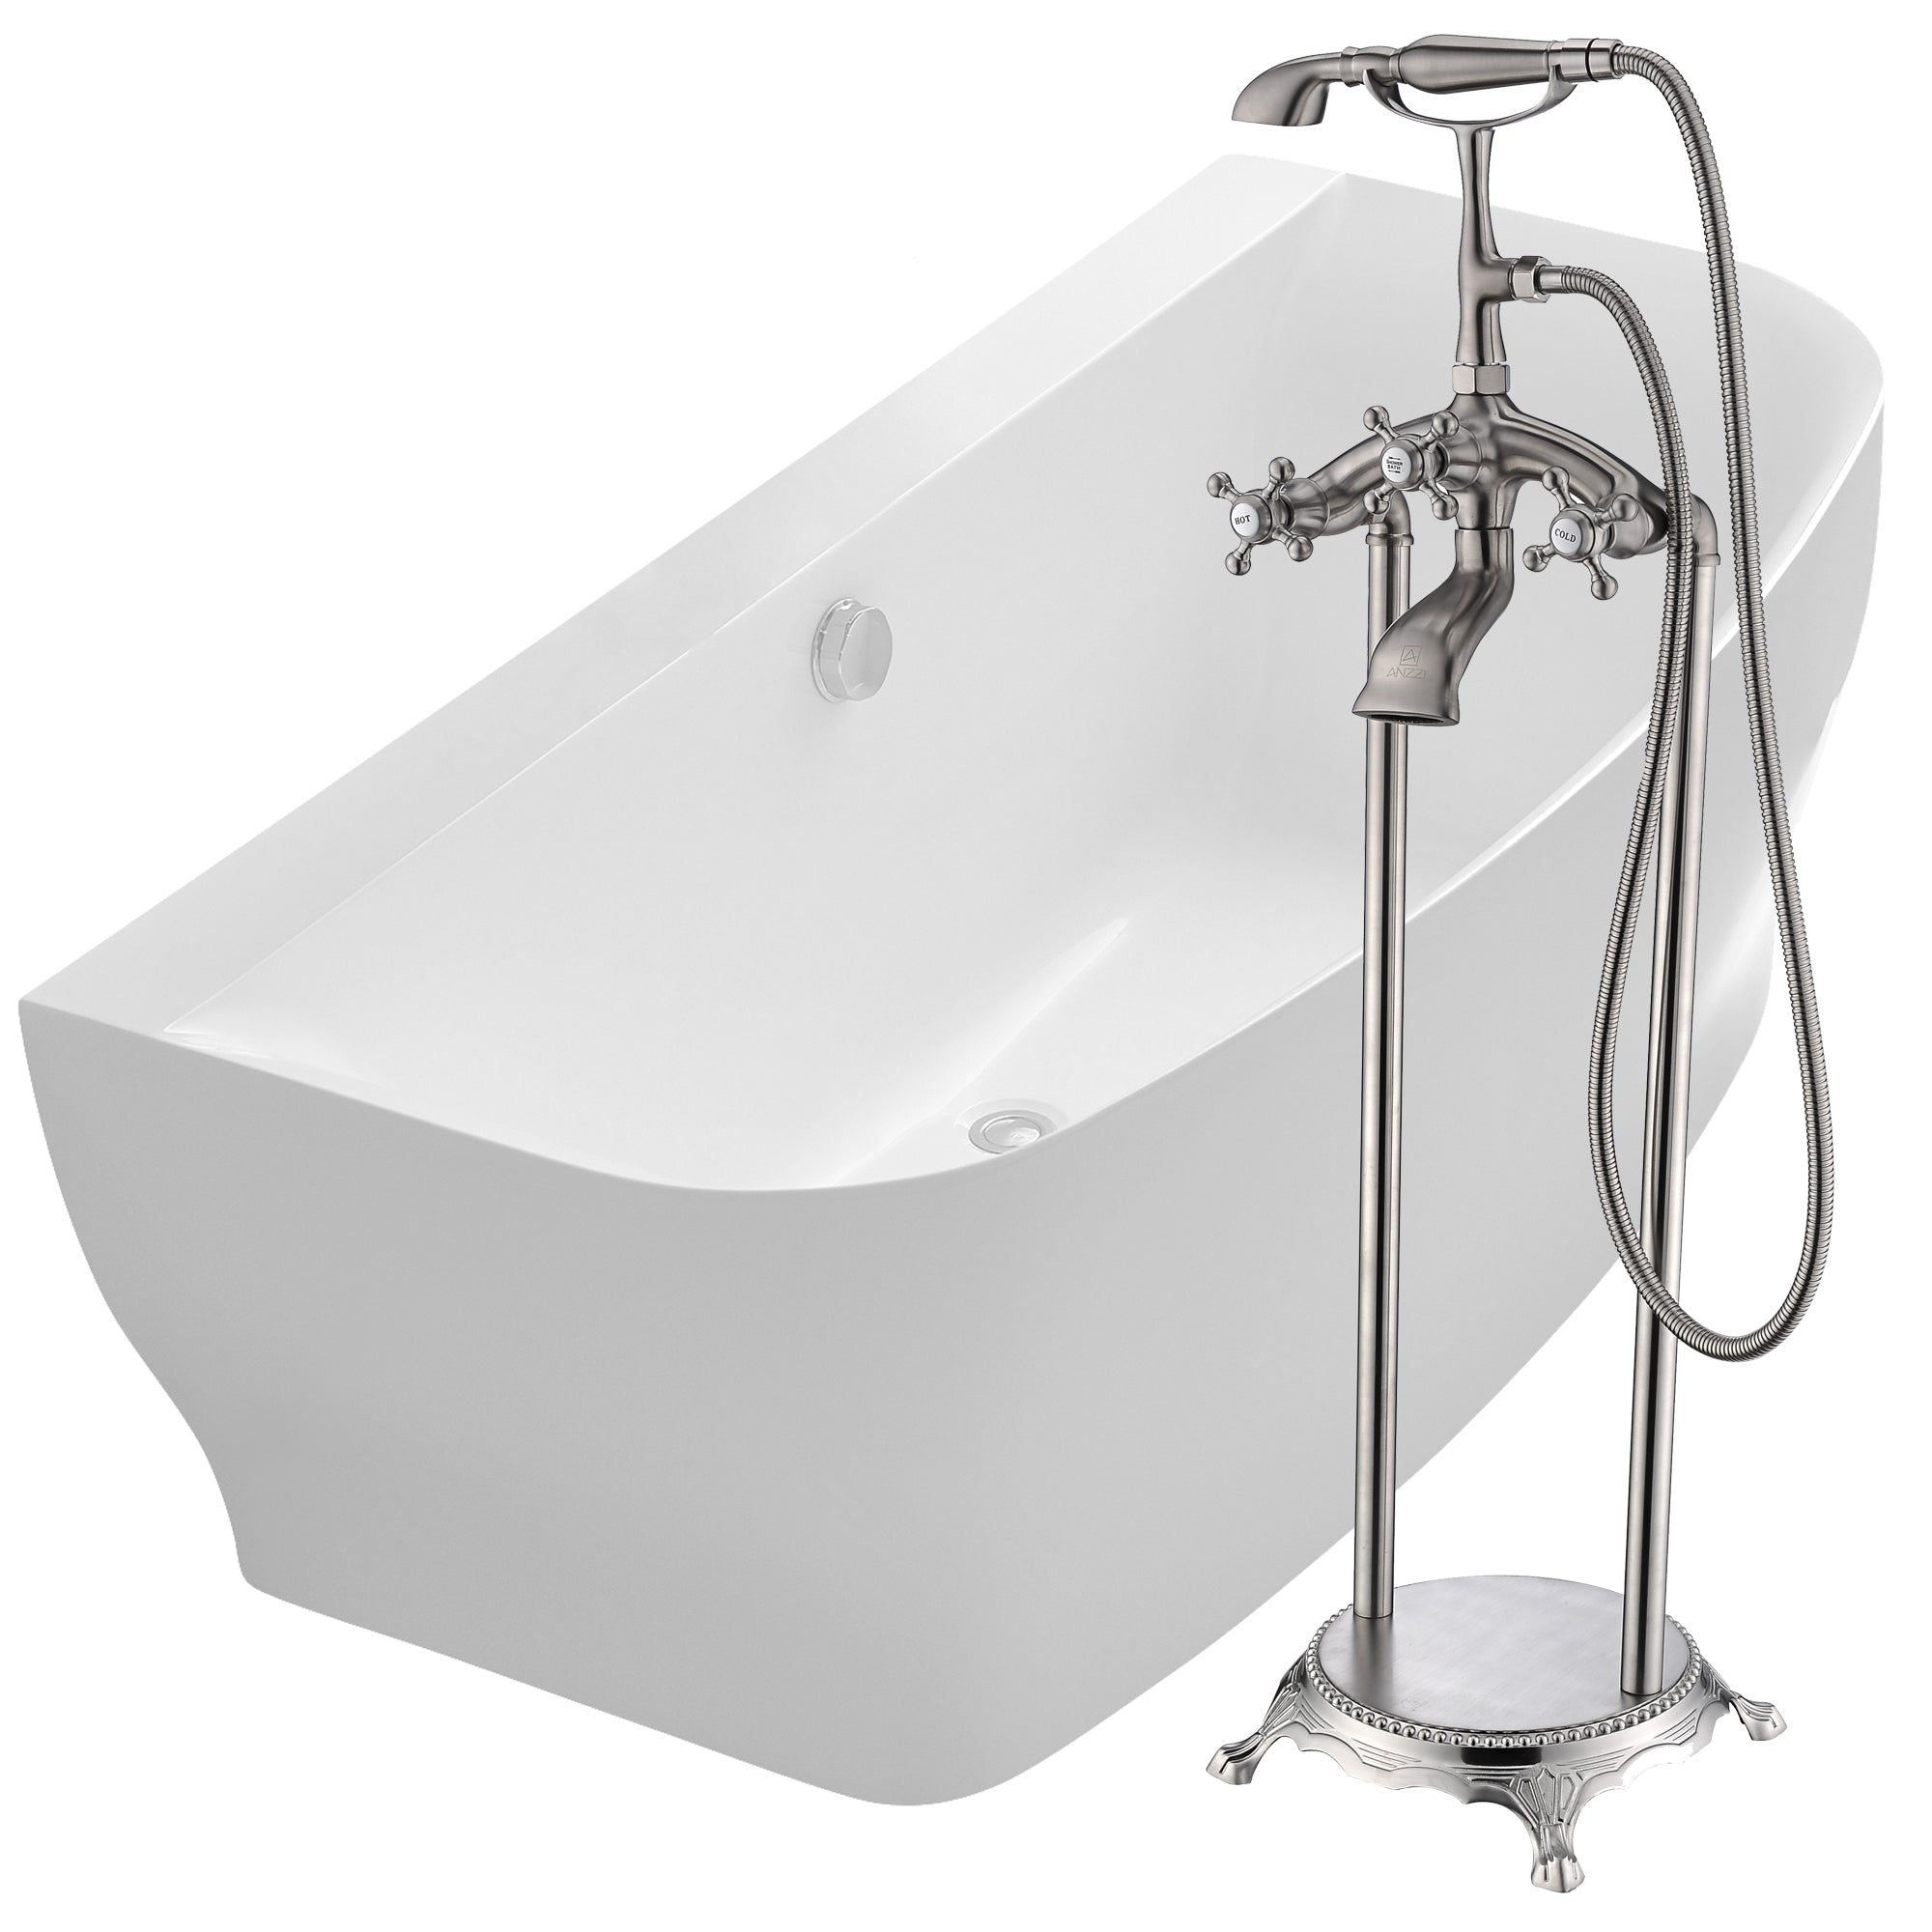 Anzzi Bank 64.9 in. Acrylic Flatbottom Bathtub in Gloss White Finish - Tugela Faucet with Hand Shower in Brushed Nickel - Floor Mounted - Built-in Chrome Overflow and Push Operated Center Drain - FTAZ112-0052B - Vital Hydrotherapy